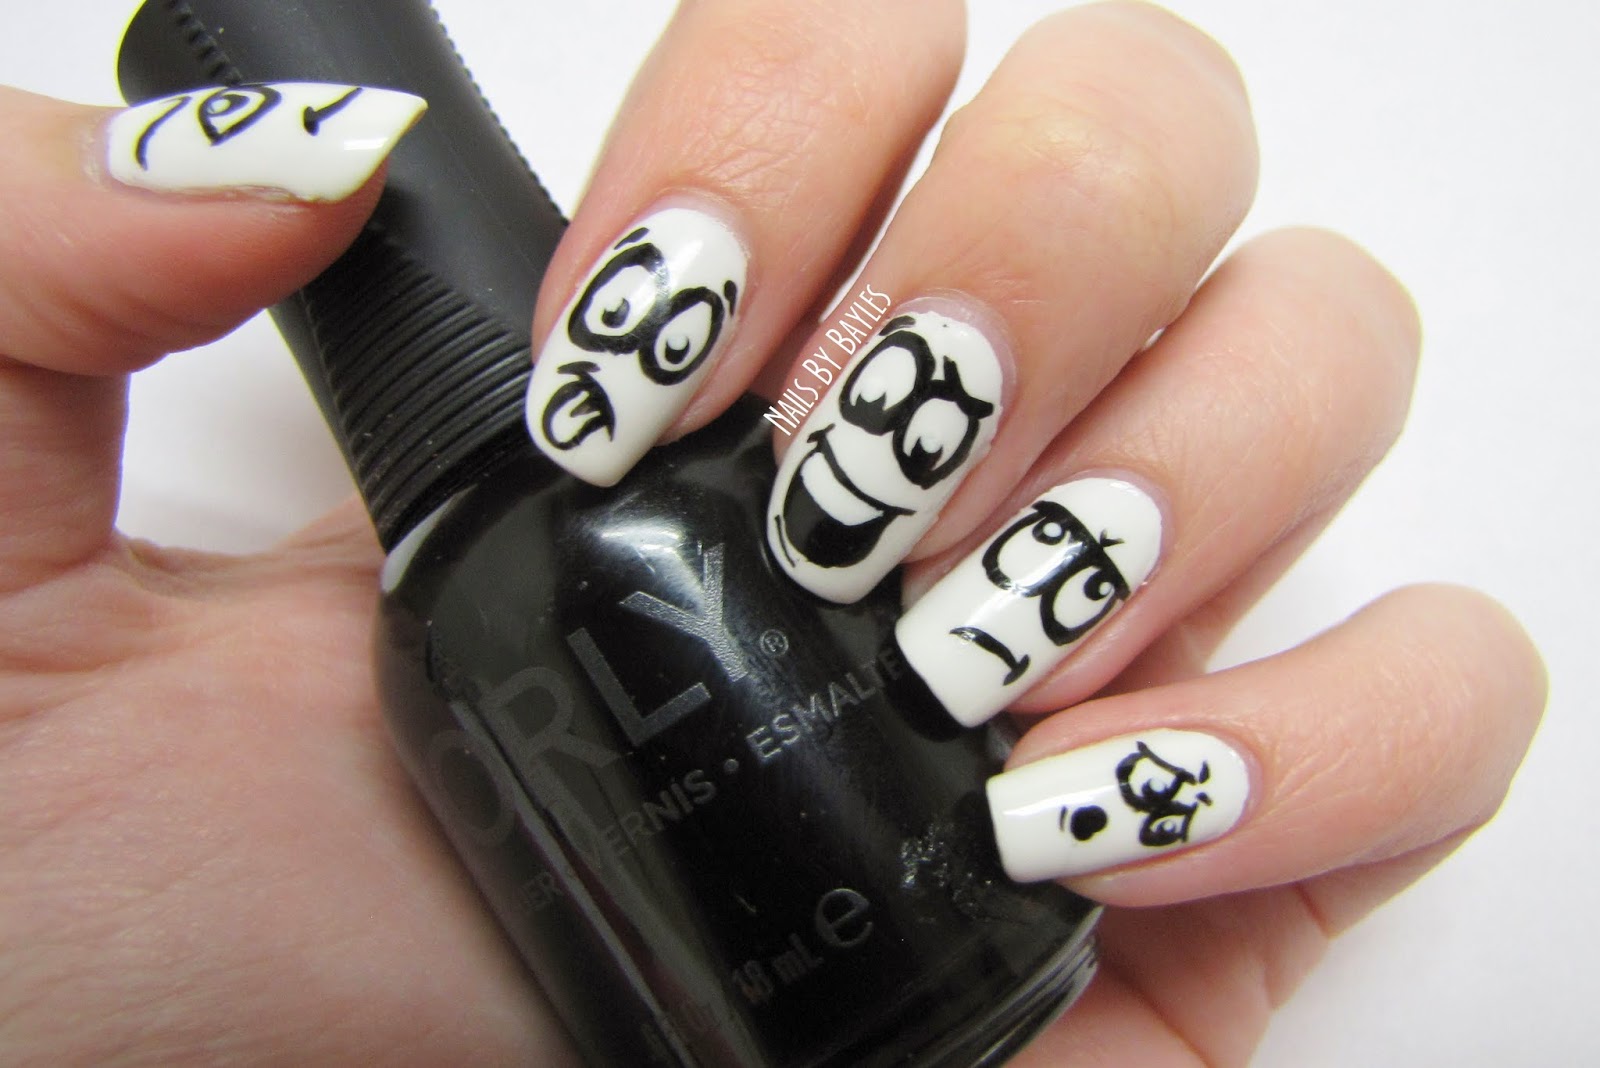 Nails By Bayles: Silly Faces Nail Art